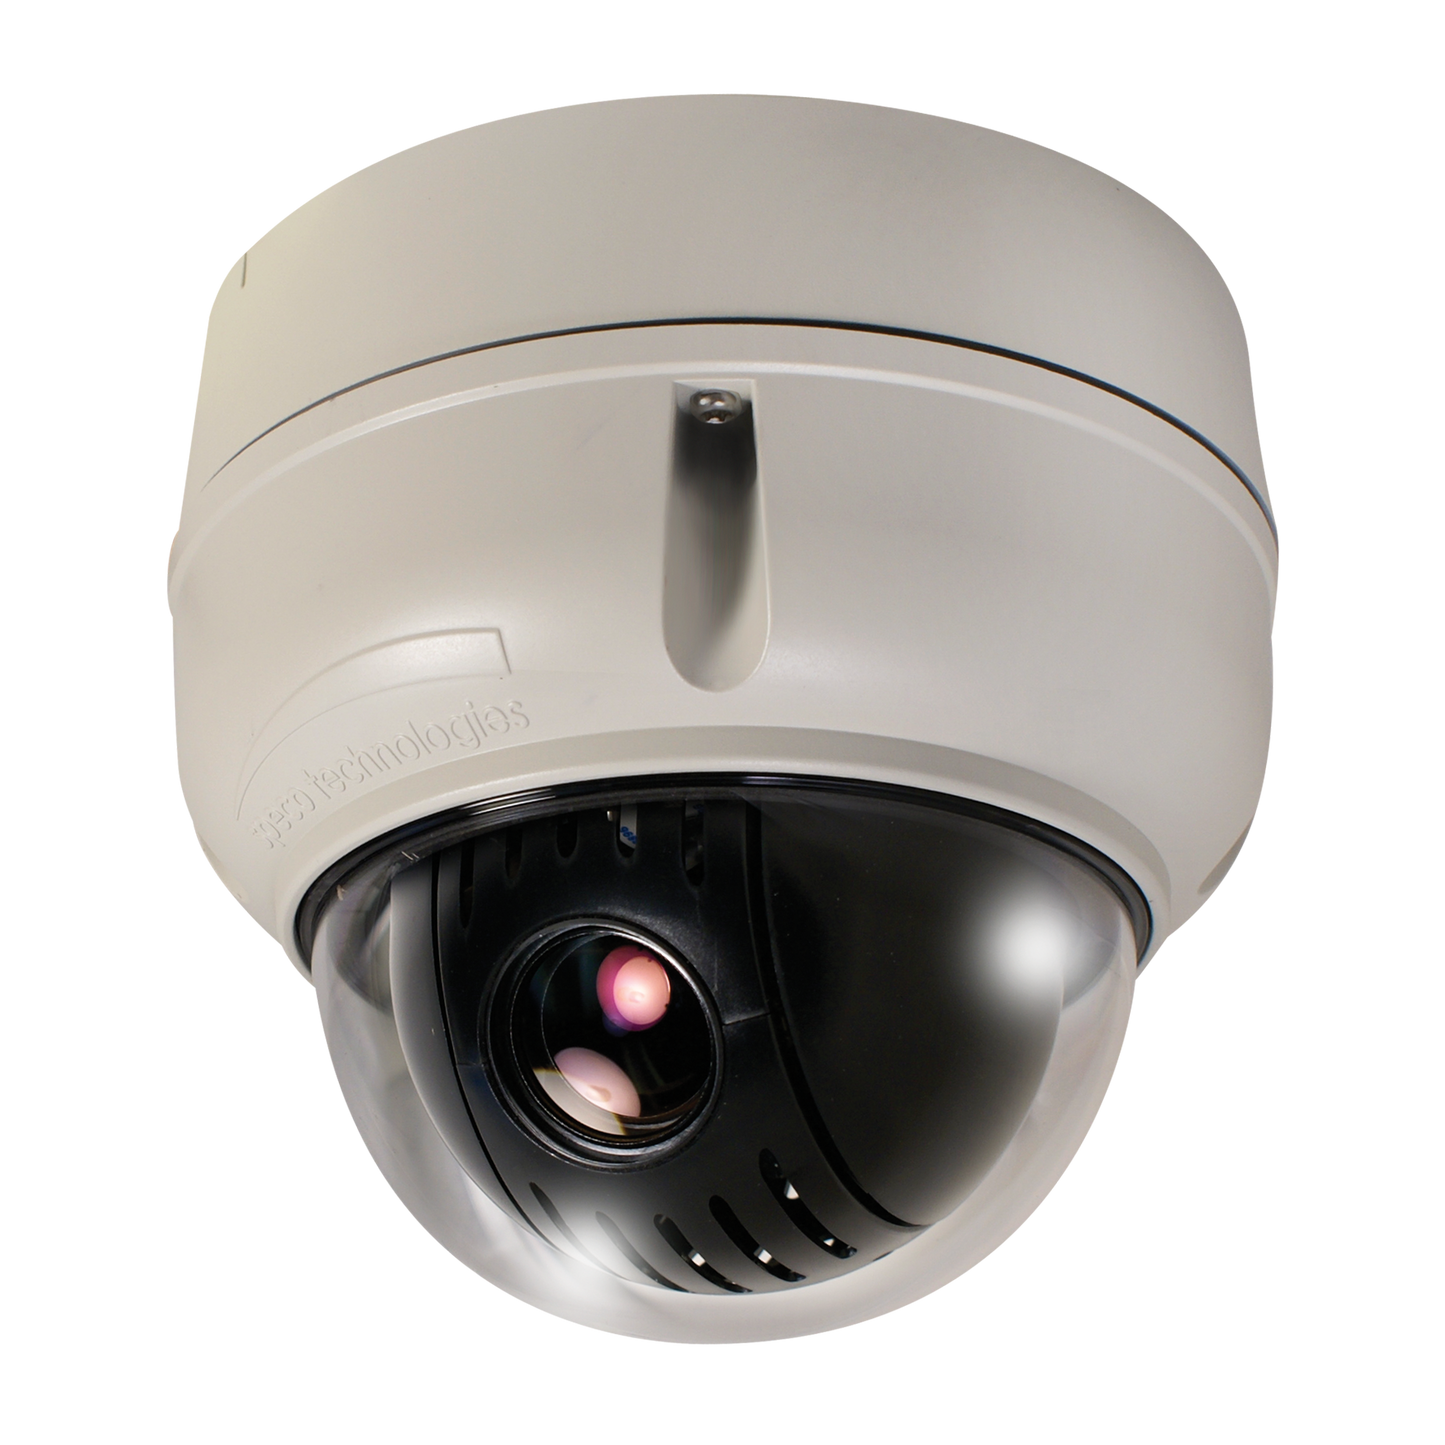 Speco HTPTZ20T 2MP HD-TVI Indoor/Outdoor PTZ Speed Dome Camera with 20x Optical Zoom Lens, NDAA